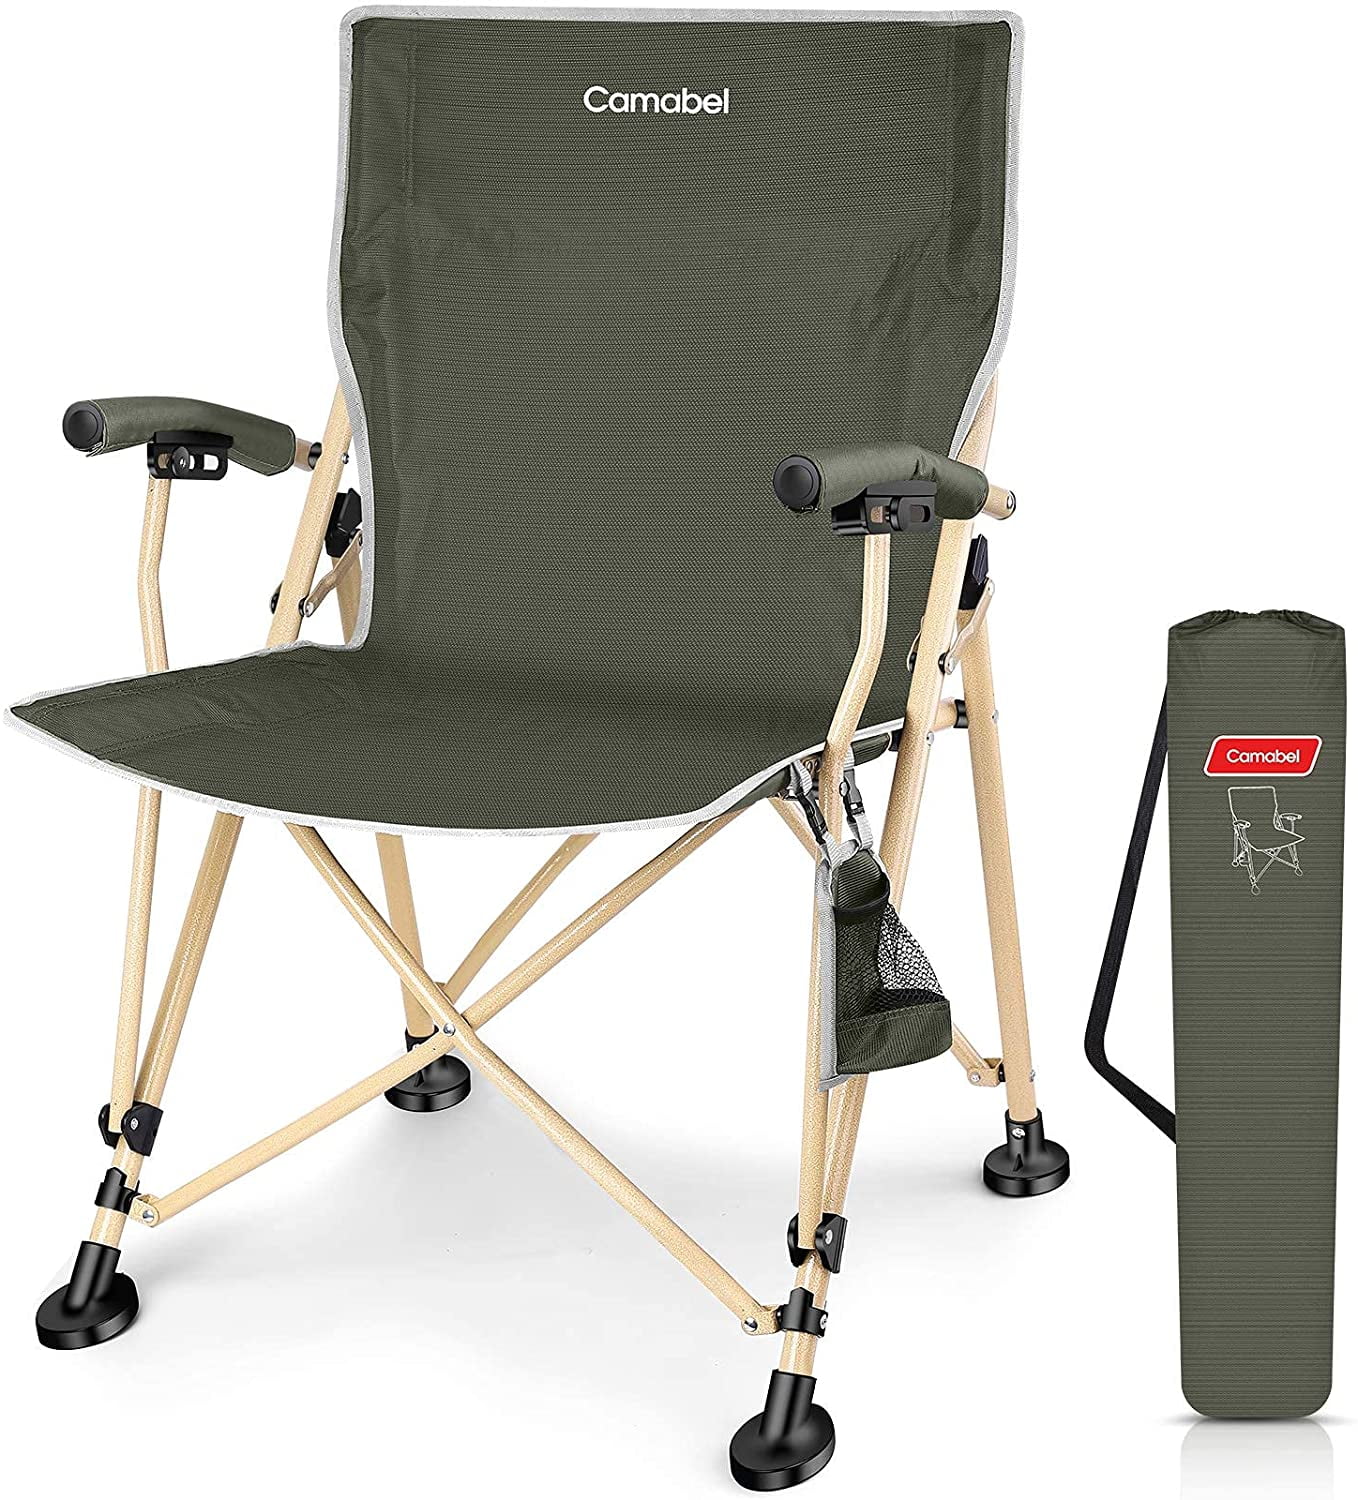 Quality Outdoor Foldable Fishing Chair Ultra Light Weight Portable Folding Camping Aluminum Alloy Picnic Fishing Chair with Bag